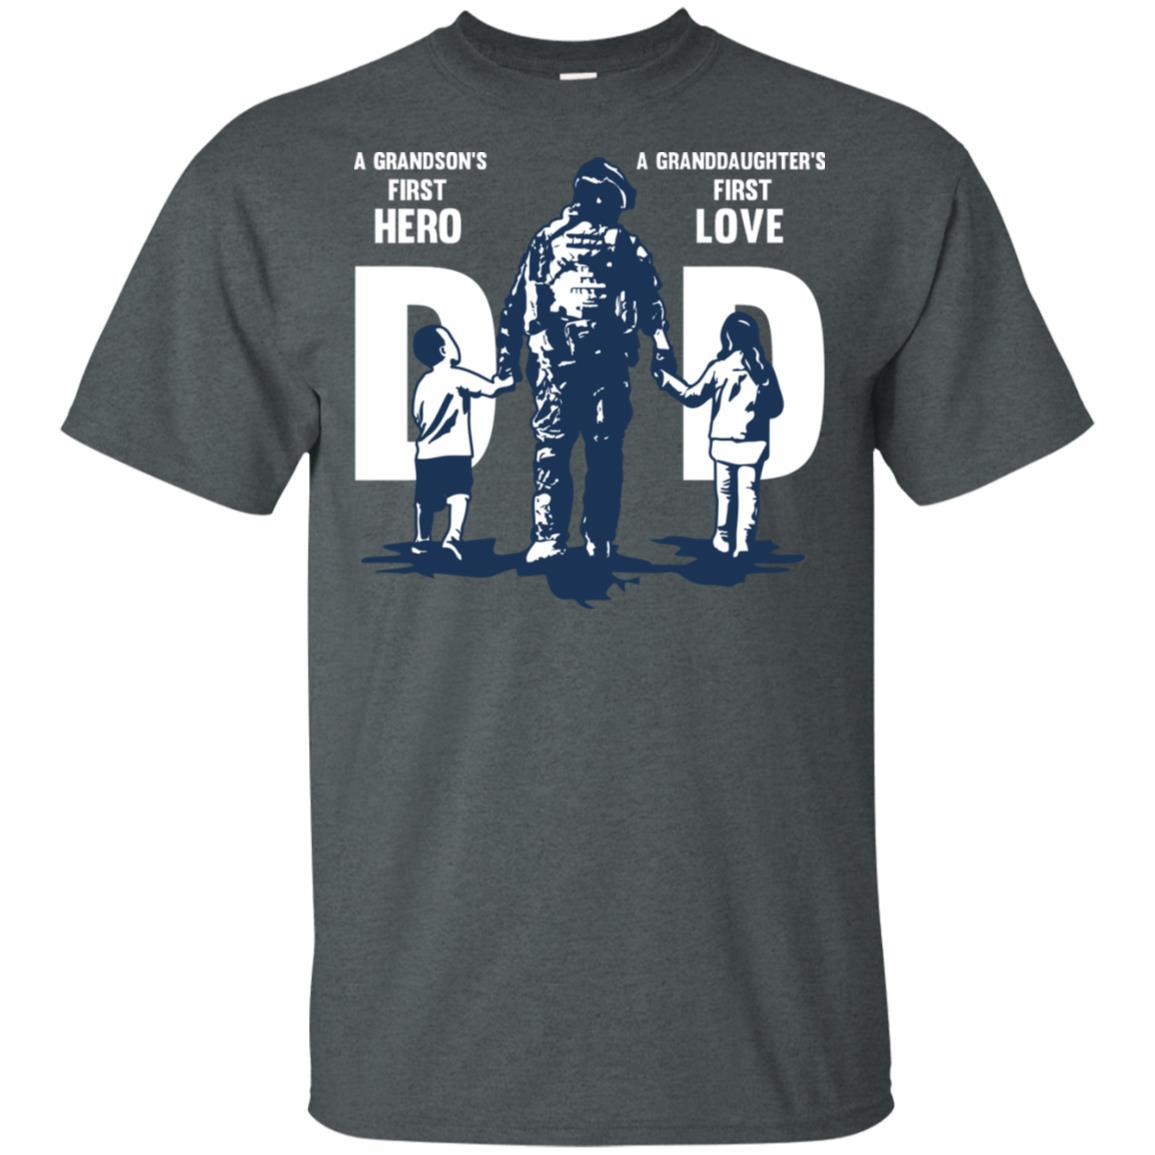 Military T-Shirt "A GRANDSON'S FIRST HERO A GRANDDAUGHTER FIRST LOVE DAD On" Front-TShirt-General-Veterans Nation